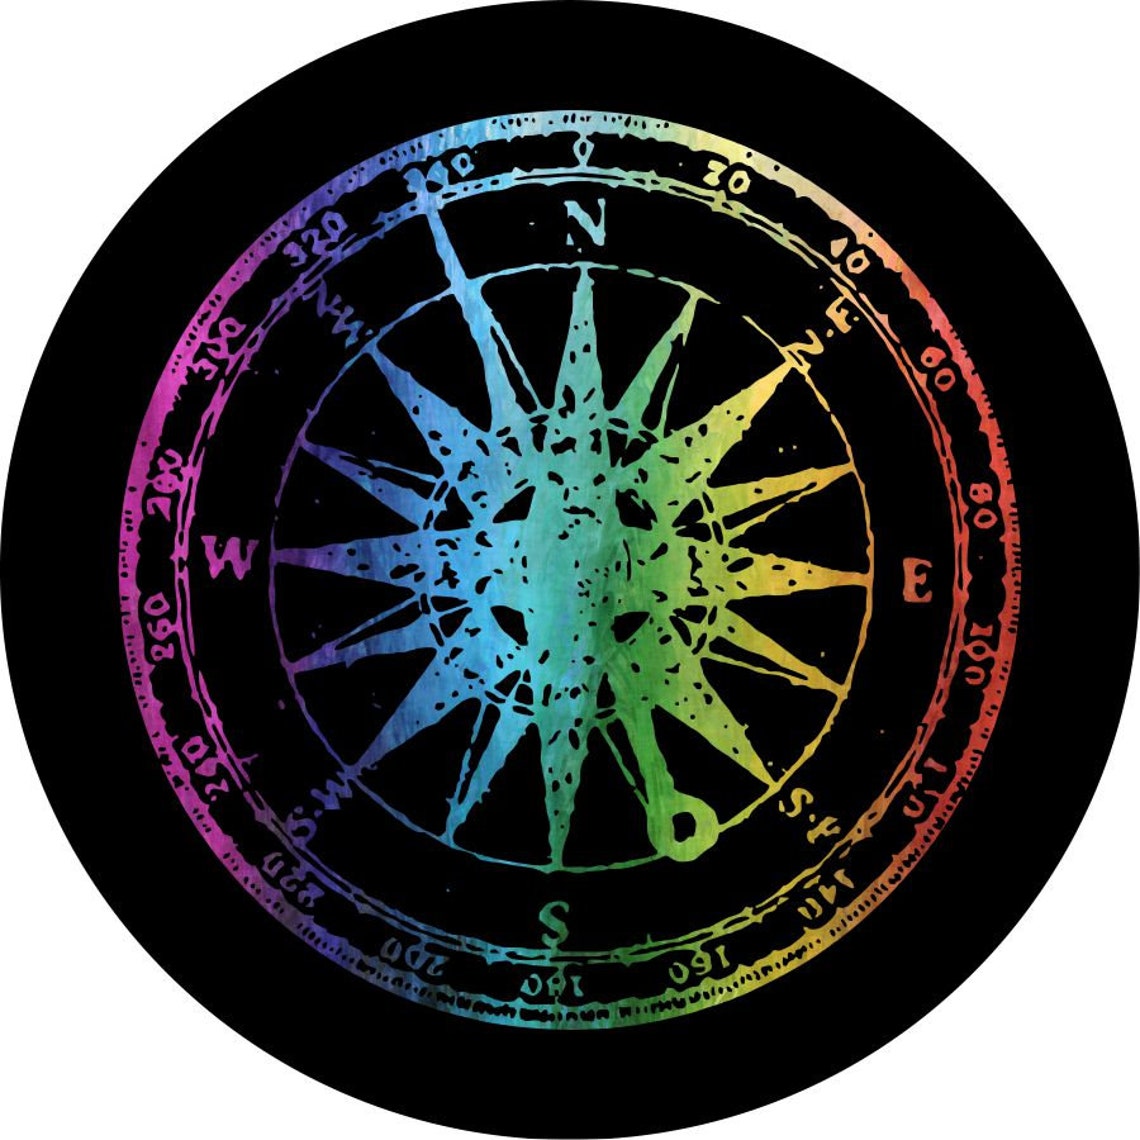 Distressed Rainbow Compass Tie-Dye Spare Tire Cover on black vinyl.